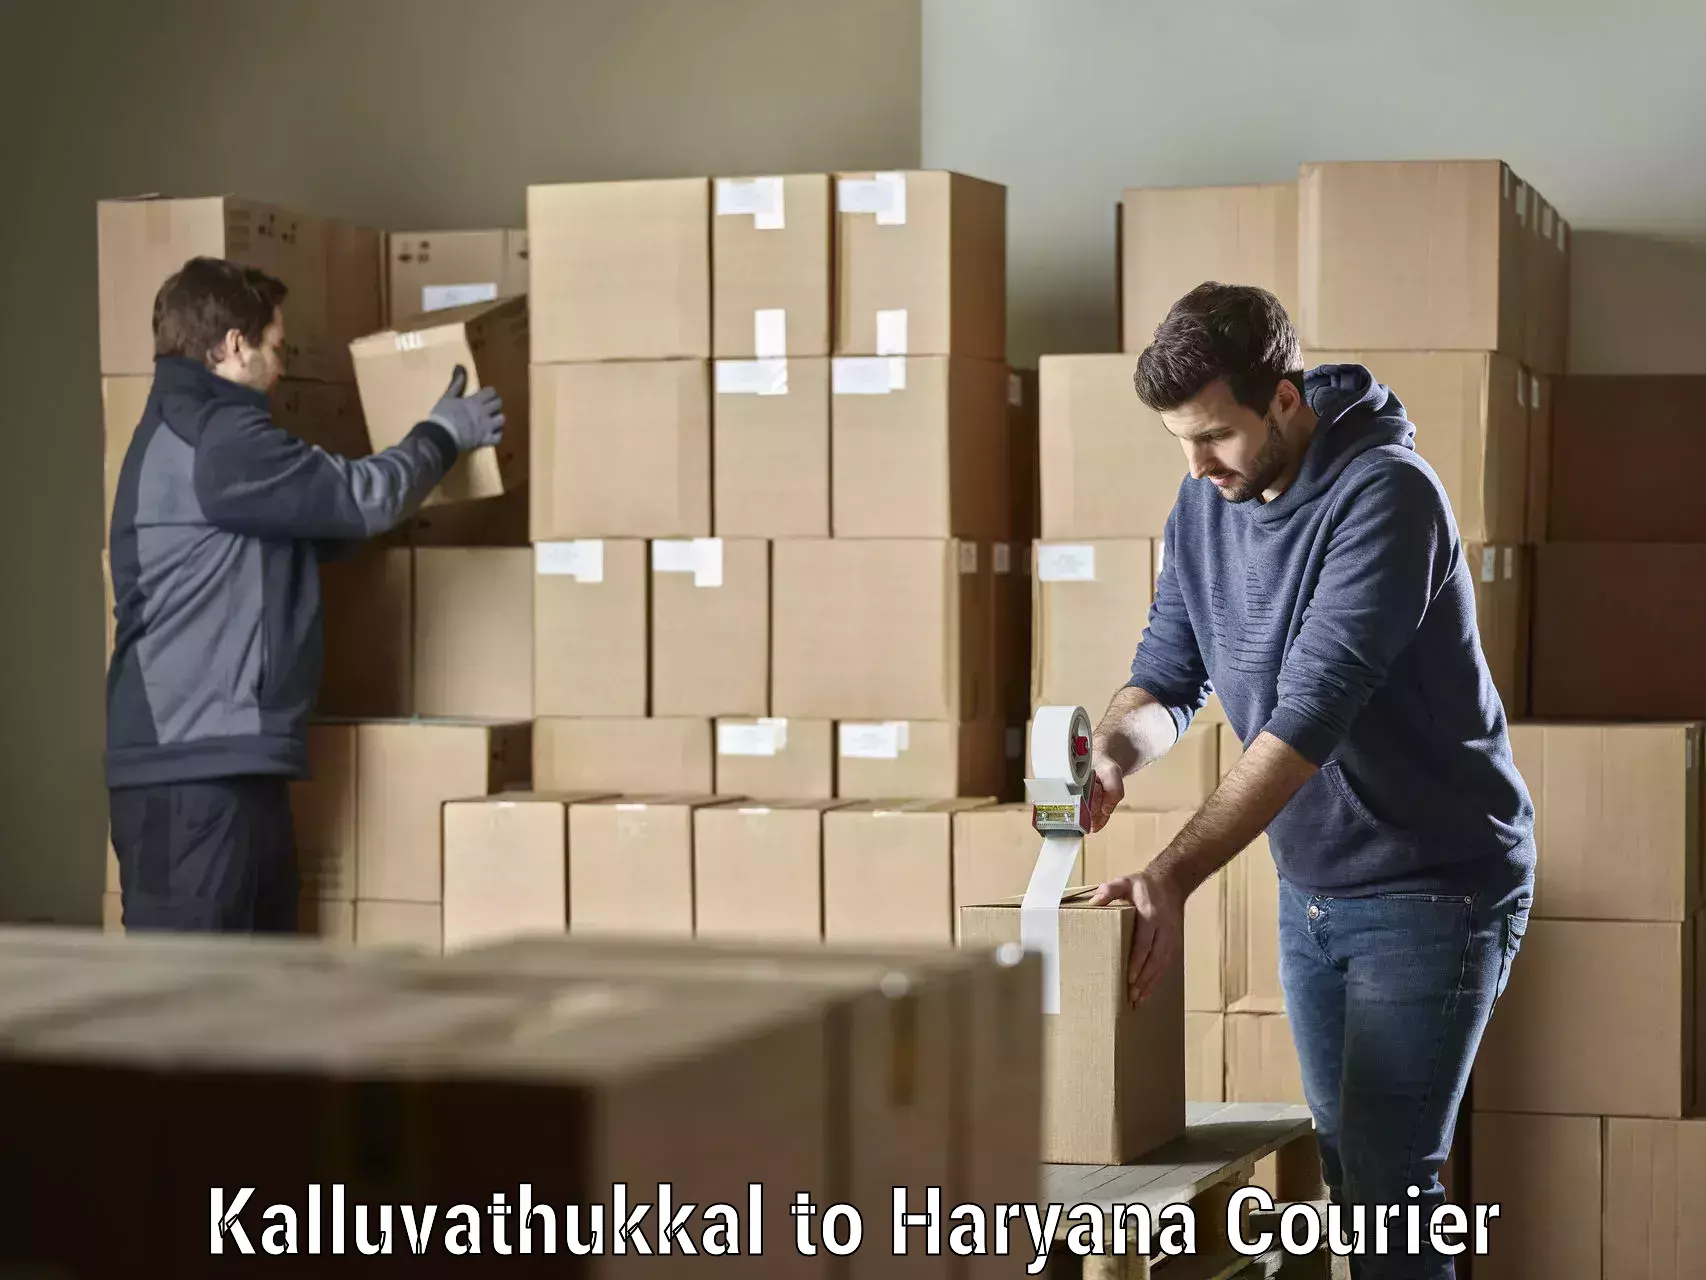 Courier service efficiency Kalluvathukkal to Chaudhary Charan Singh Haryana Agricultural University Hisar